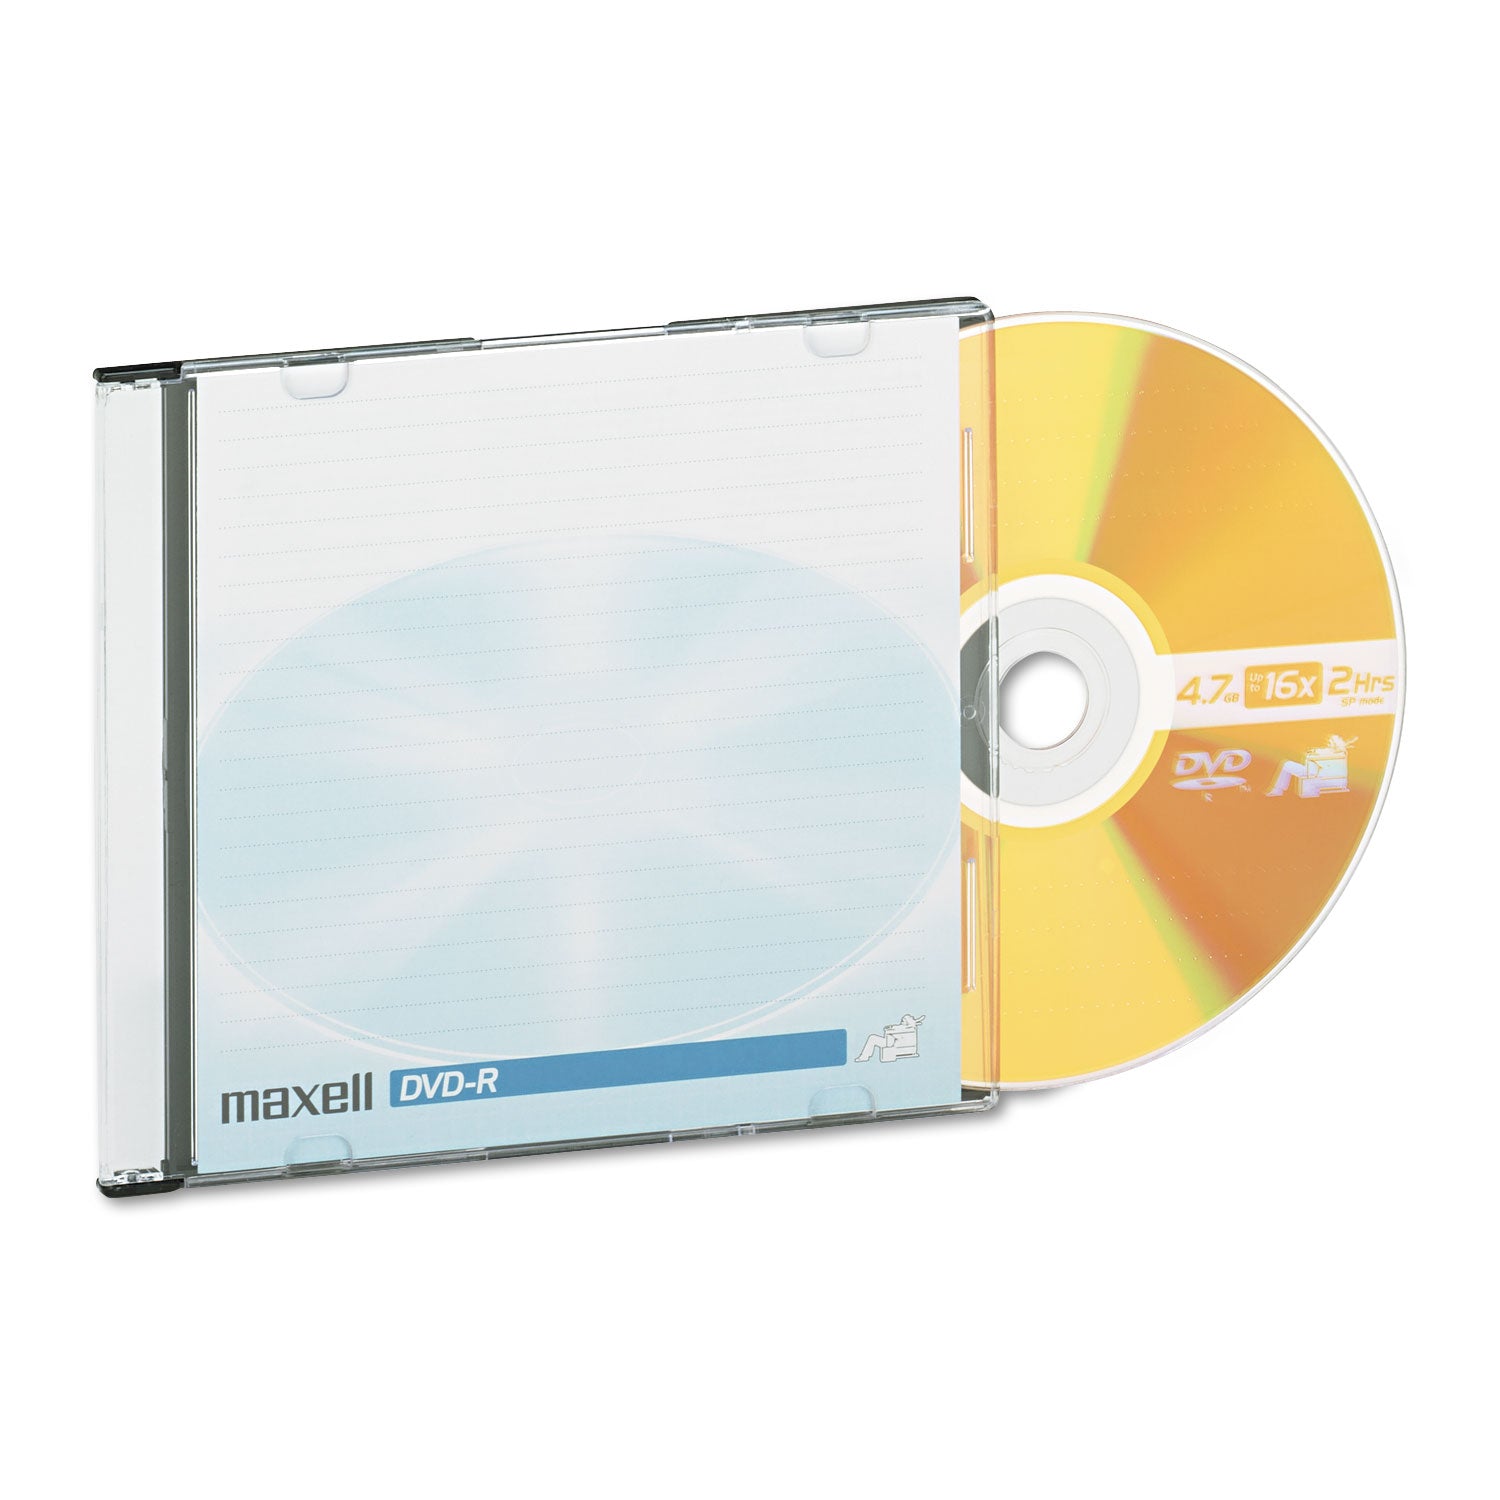 DVD-R Recordable Disc, 4.7 GB, 16x, Jewel Case, Gold, 10/Pack - 